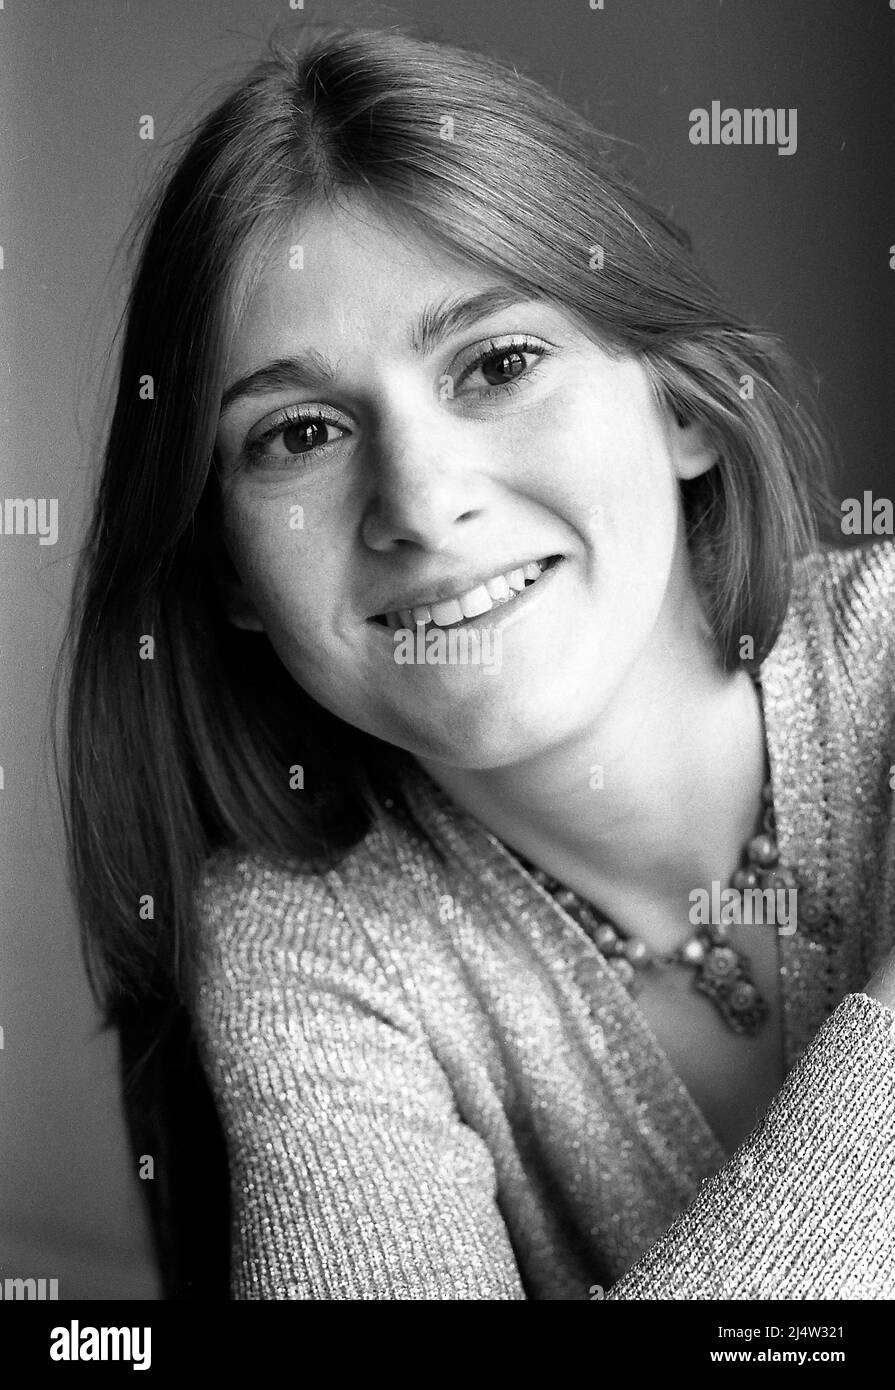 Black and white soft light portrait of a young woman. Stock Photo